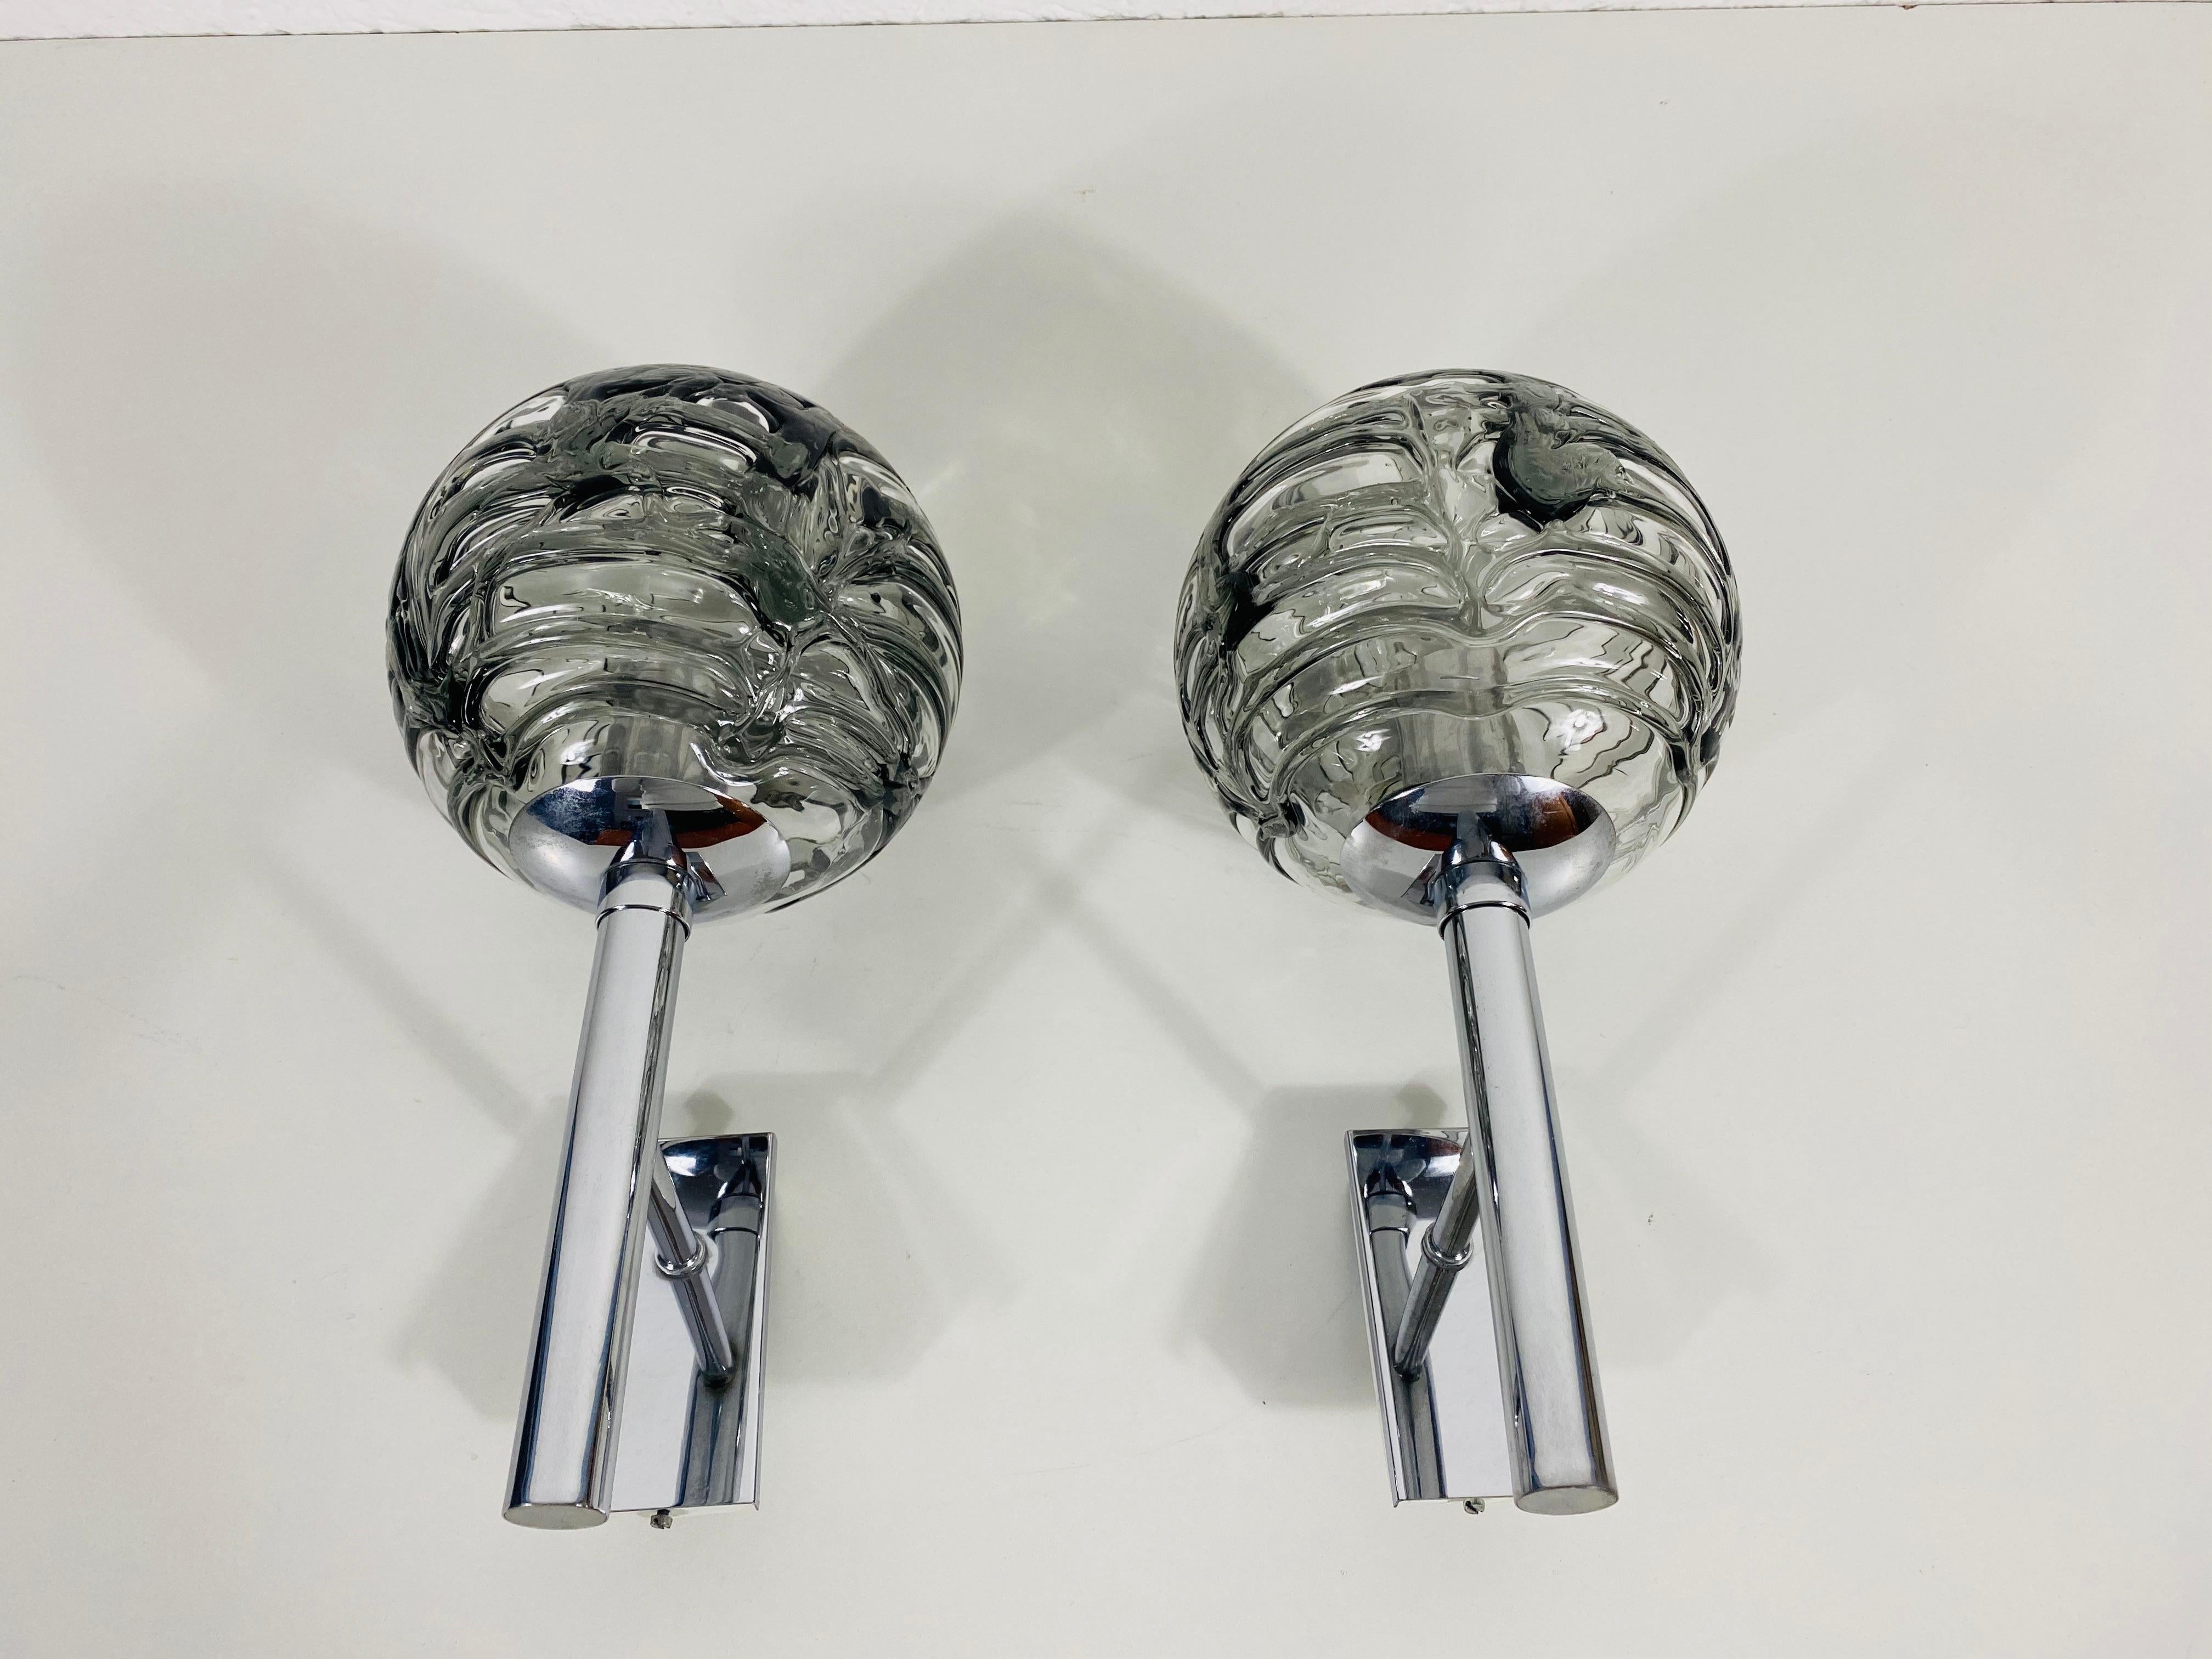 Midcentury pair of beautiful wall lights by the German brand Doria made in the 1960s. They have a beautiful round shape. The unique glass shade is made from Murano glass.

The lightings require E14 light bulbs. Works with both 120/220V. Very good